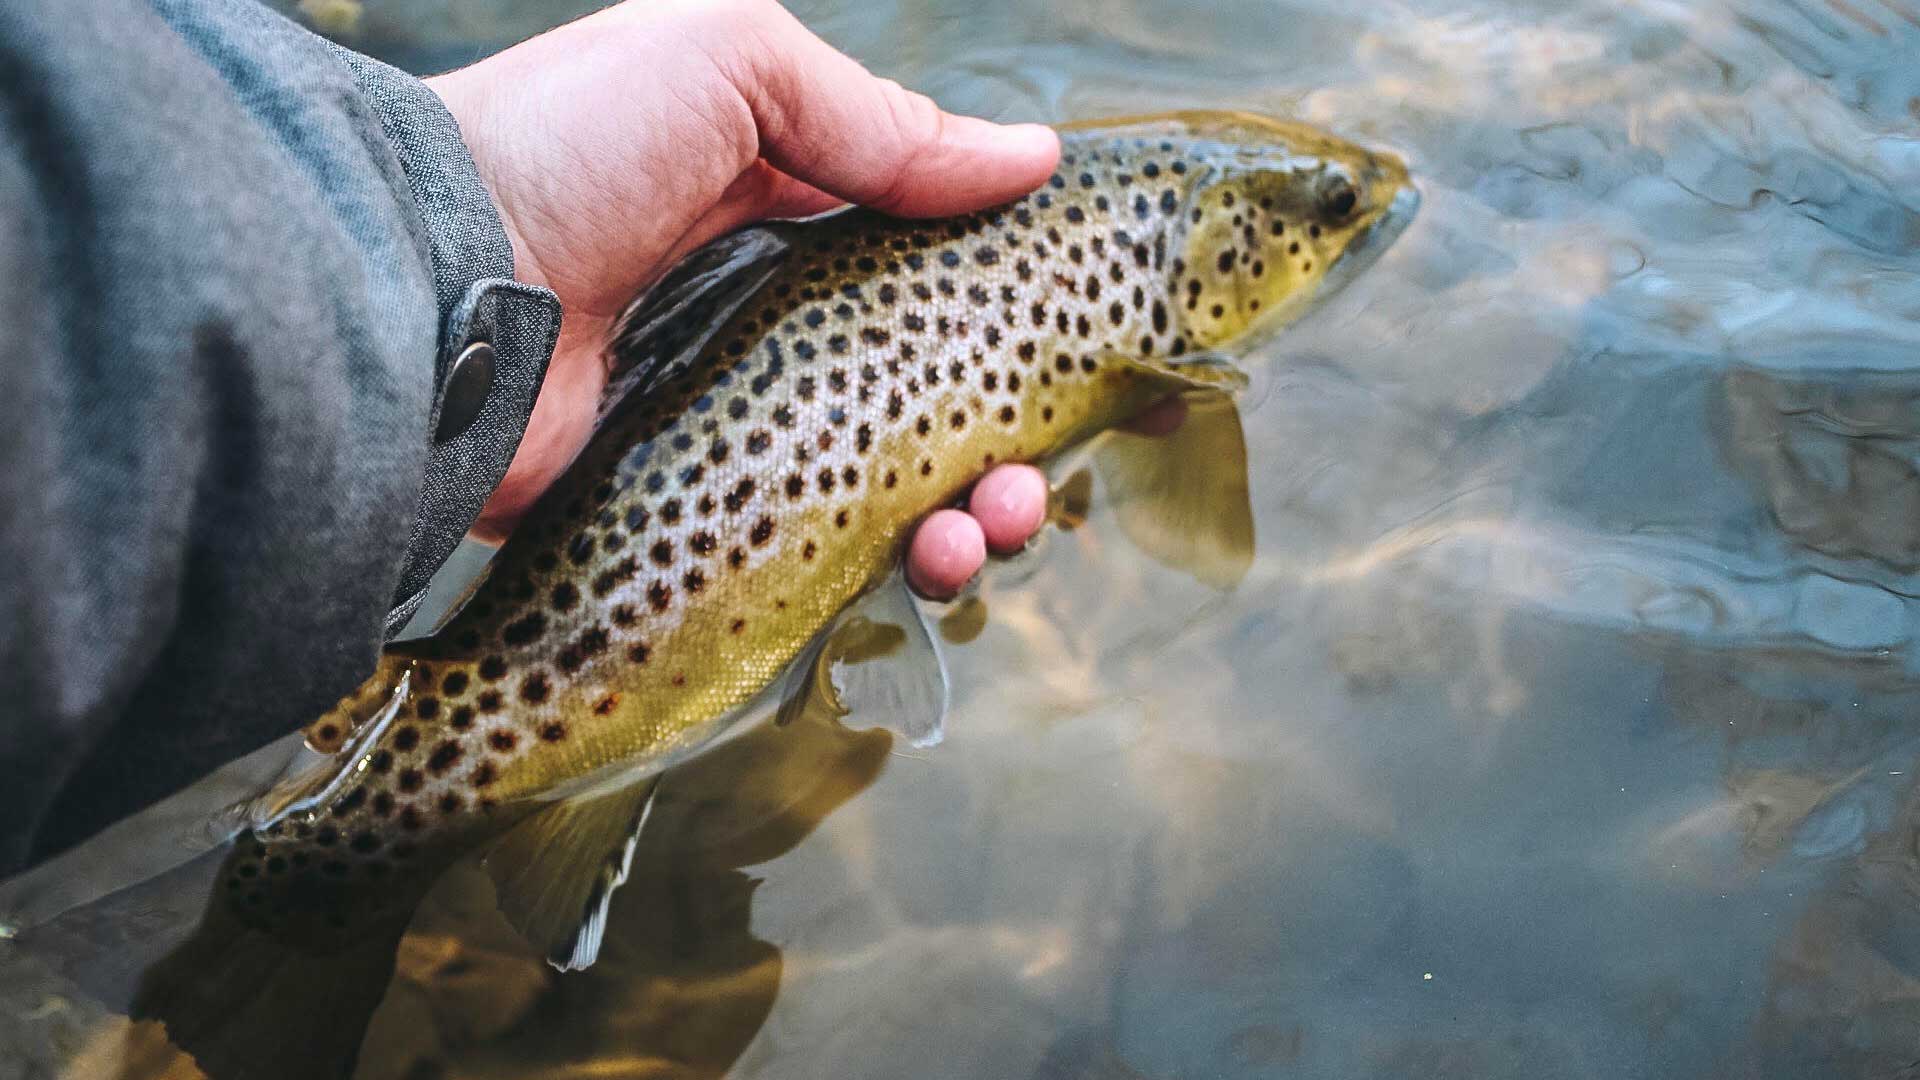 Fly Fishing vs Spin Fishing: What's Effective for Catching Fish?